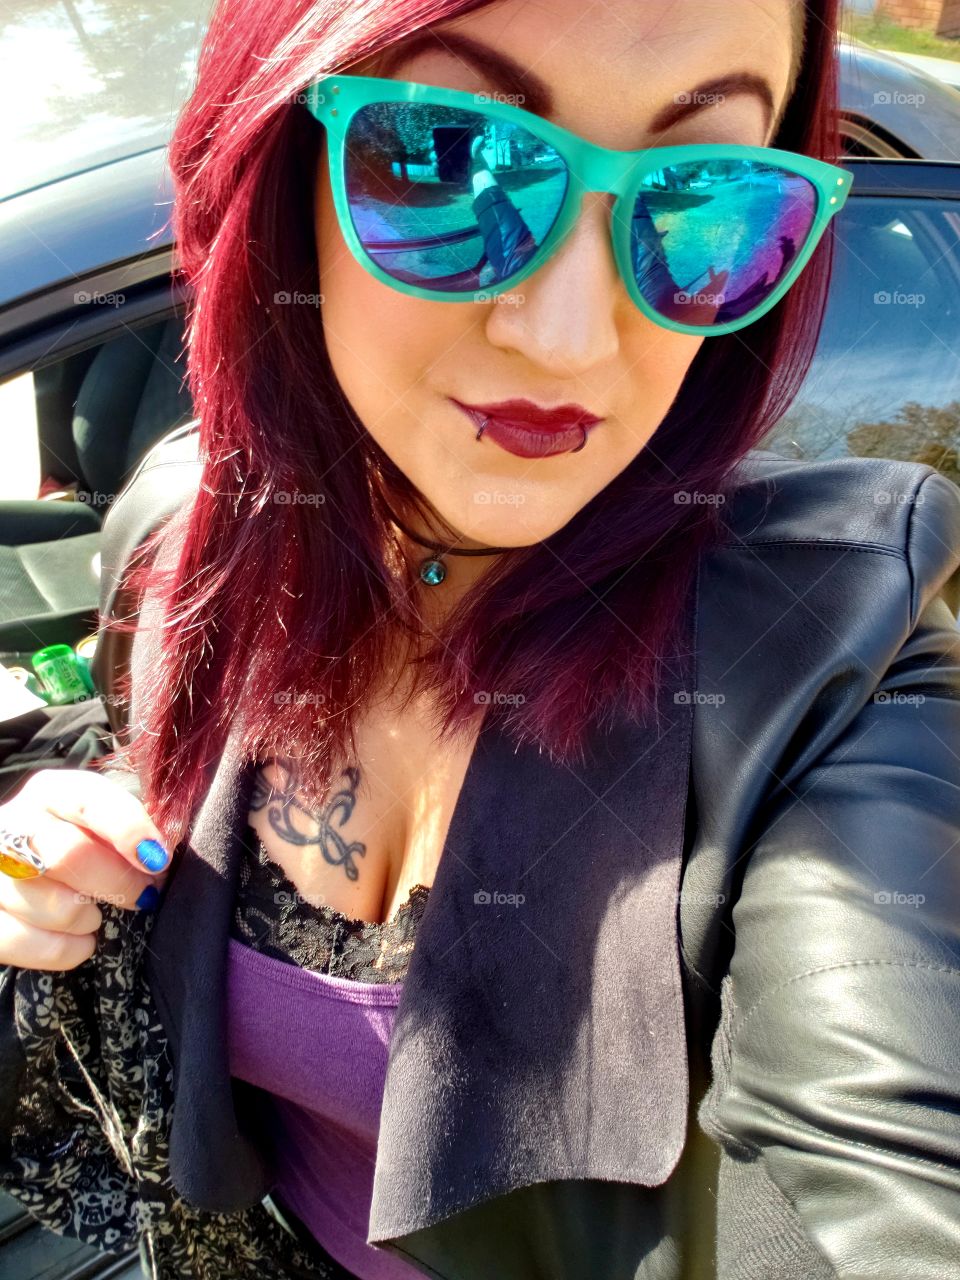 Fierce Red Hair & Turquoise Sunglasses